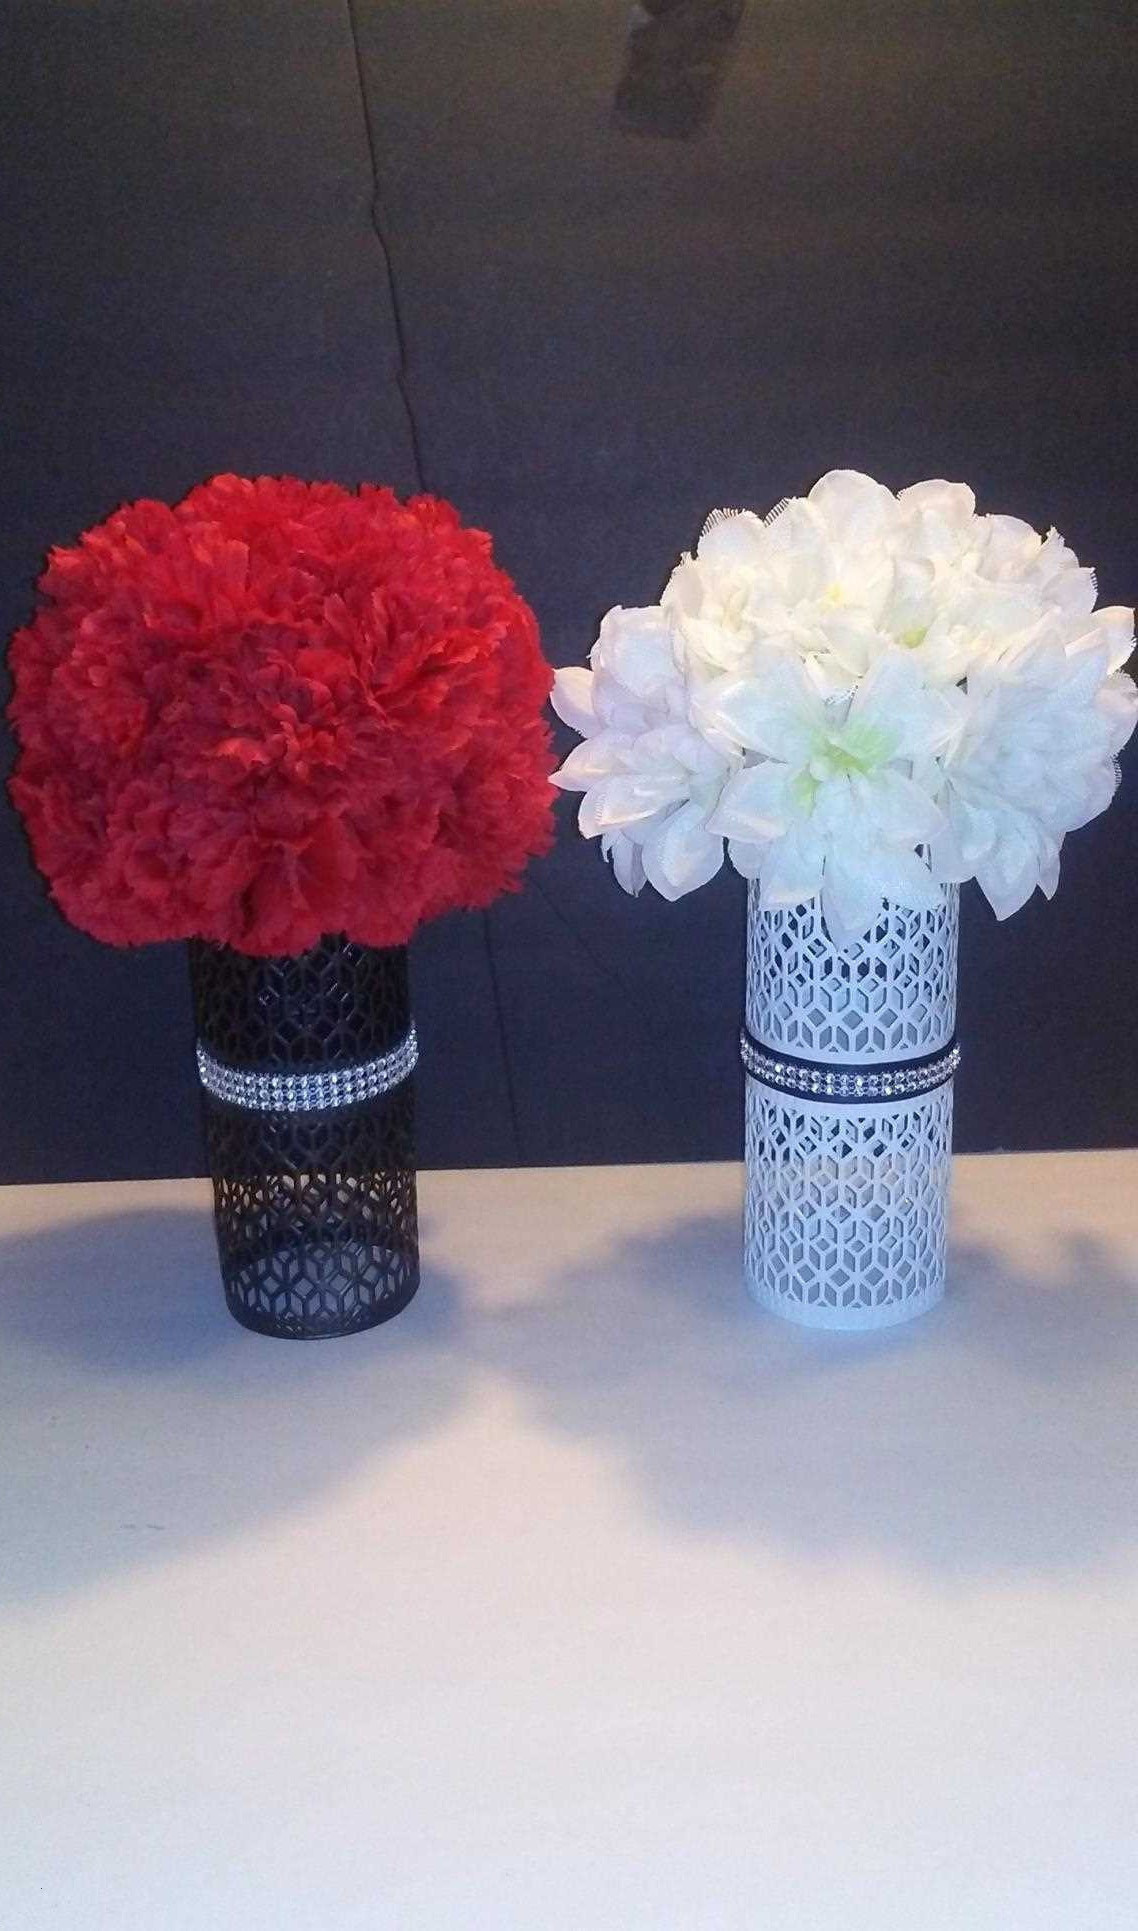 18 Lovable White Birch Bark Vases 2022 free download white birch bark vases of red and white vase pics tall vase centerpiece ideas vases flowers in with red and white vase stock red and white wedding decorations best dollar tree wedding of red